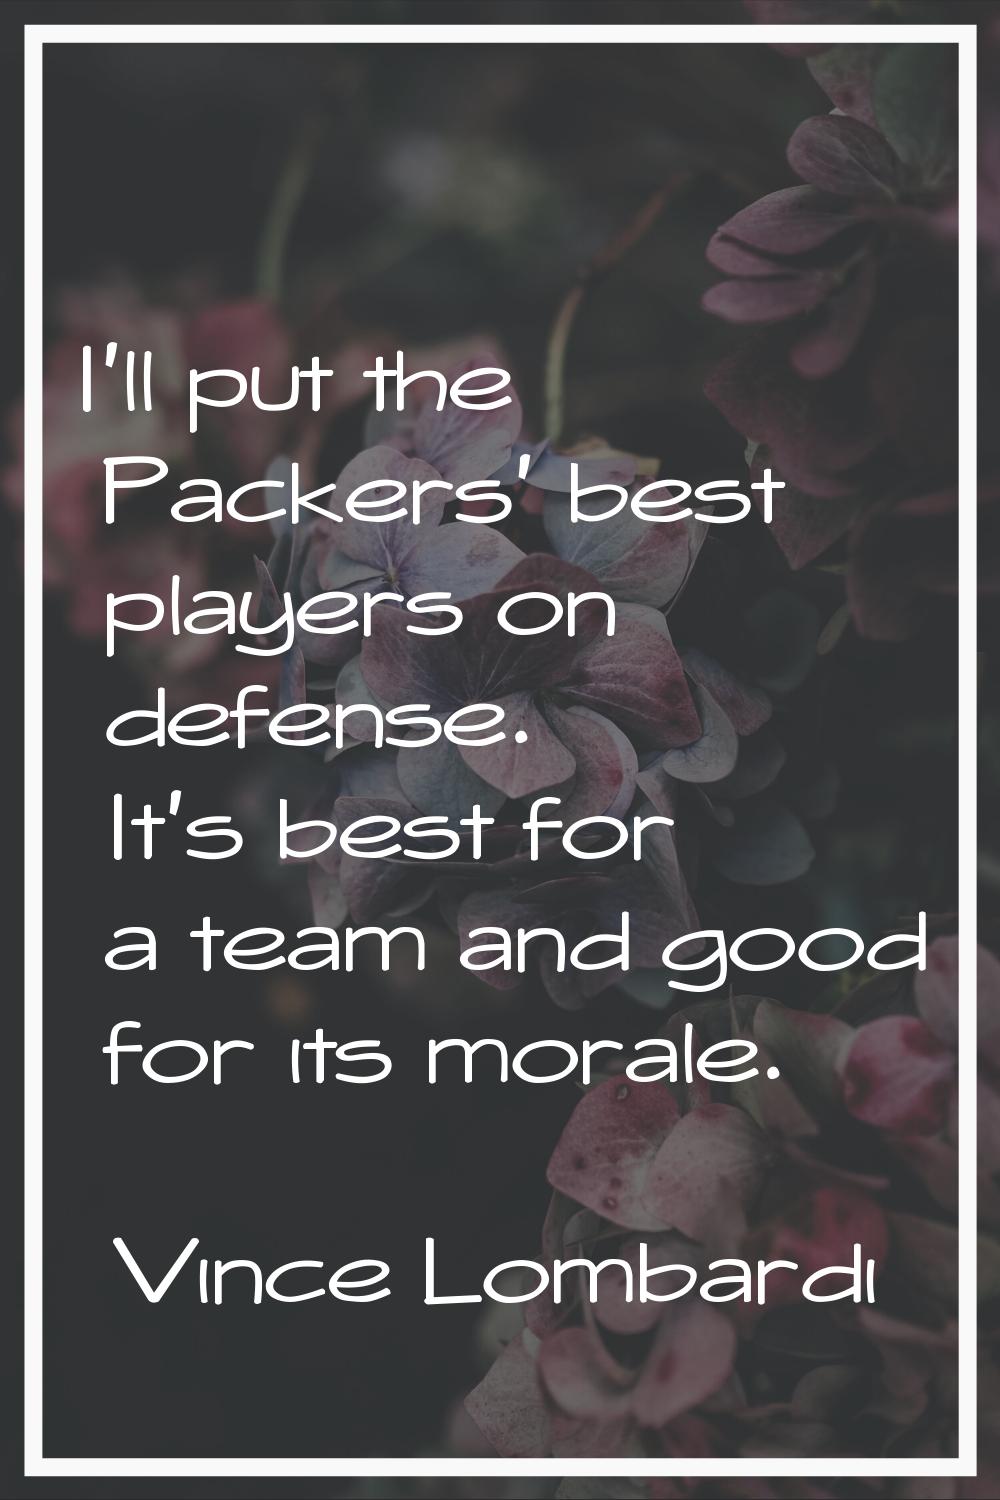 I'll put the Packers' best players on defense. It's best for a team and good for its morale.